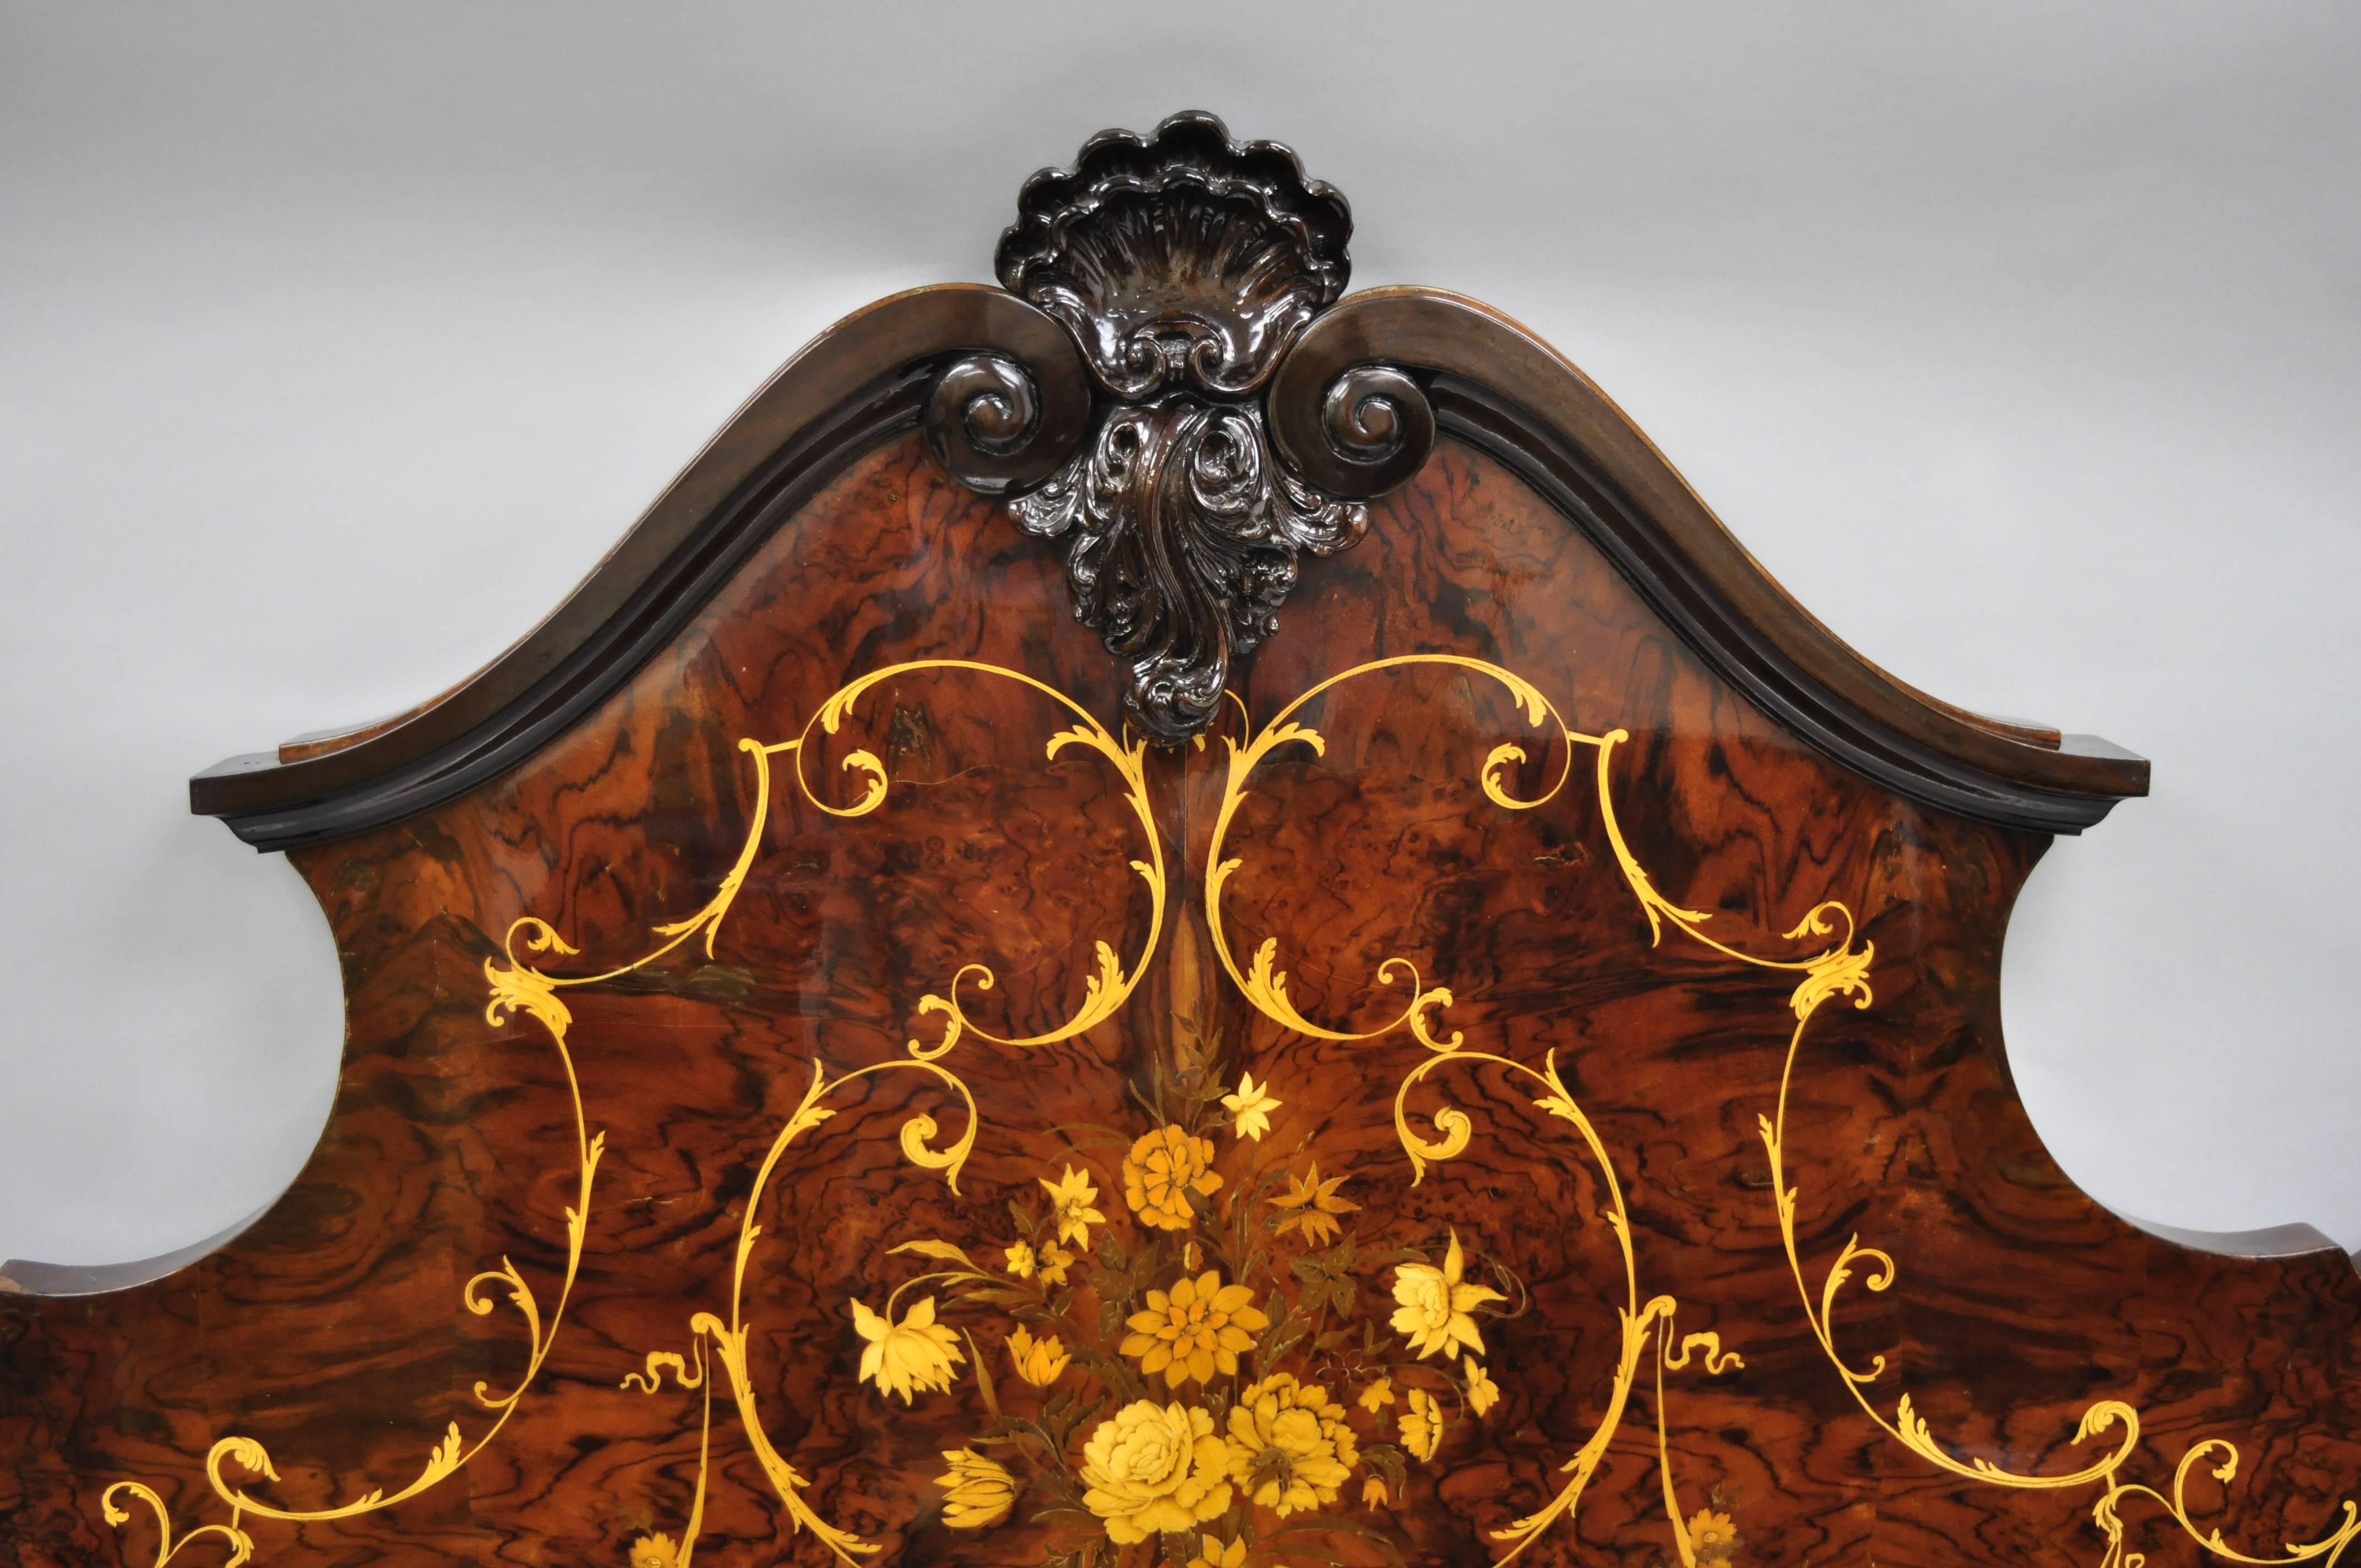 Italian Inlaid French Louis XV style king-size bed headboard by Roma Furniture in Walnut Briar. Item features beautiful floral inlay, shapely form, and stunning walnut briar wood grain with a high gloss lacquer finish. Owners provided the original